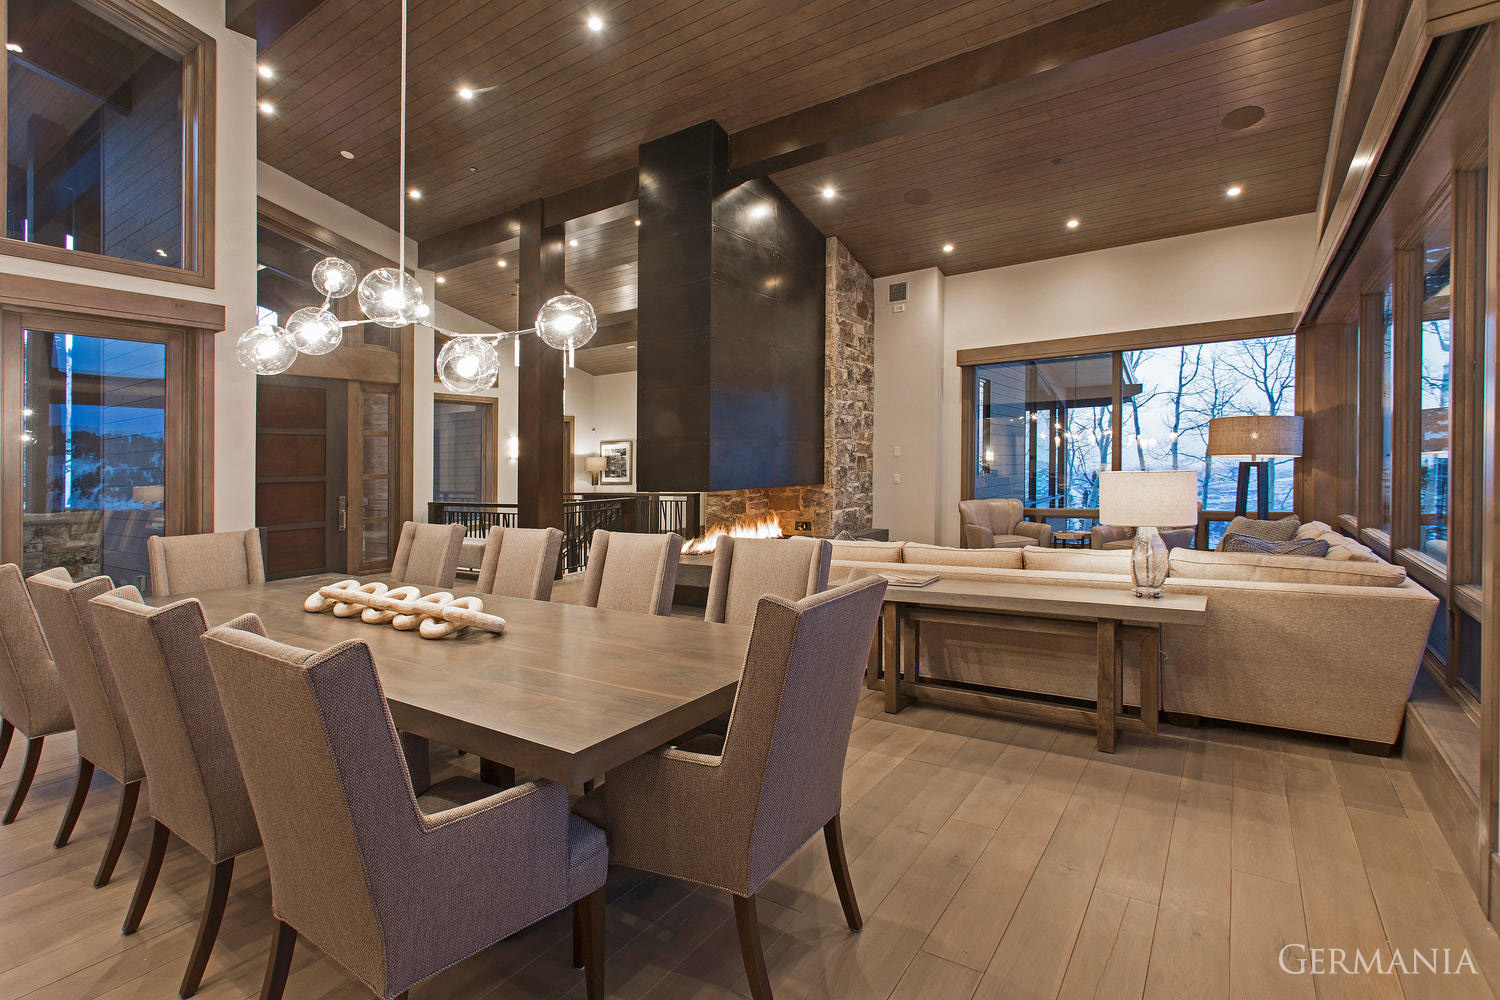 When building your custom house dining room, consider all the essential elements to maximize mountain living. Proper light fixtures and carefully design beams can augment any view!